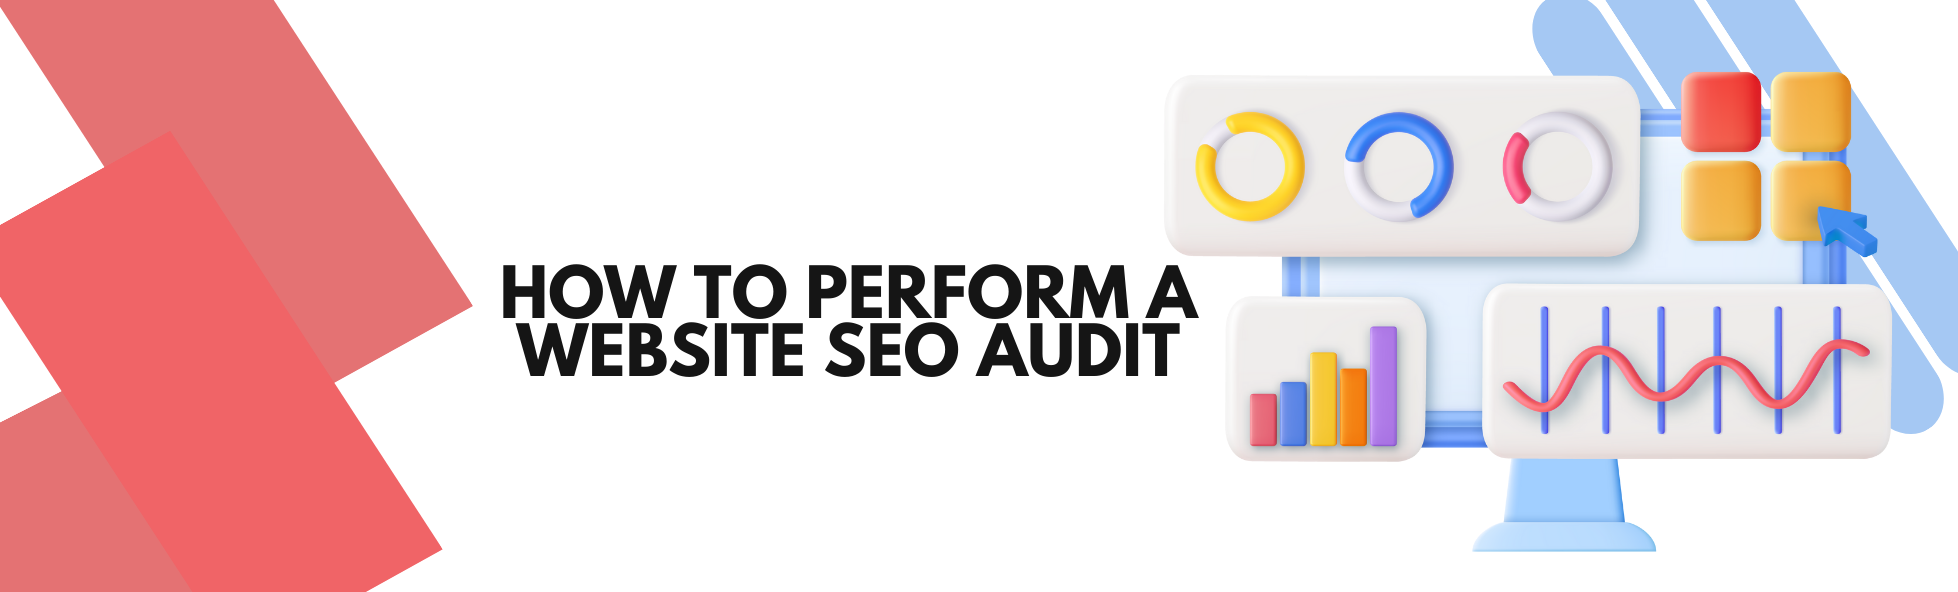 the importance of SEO audits